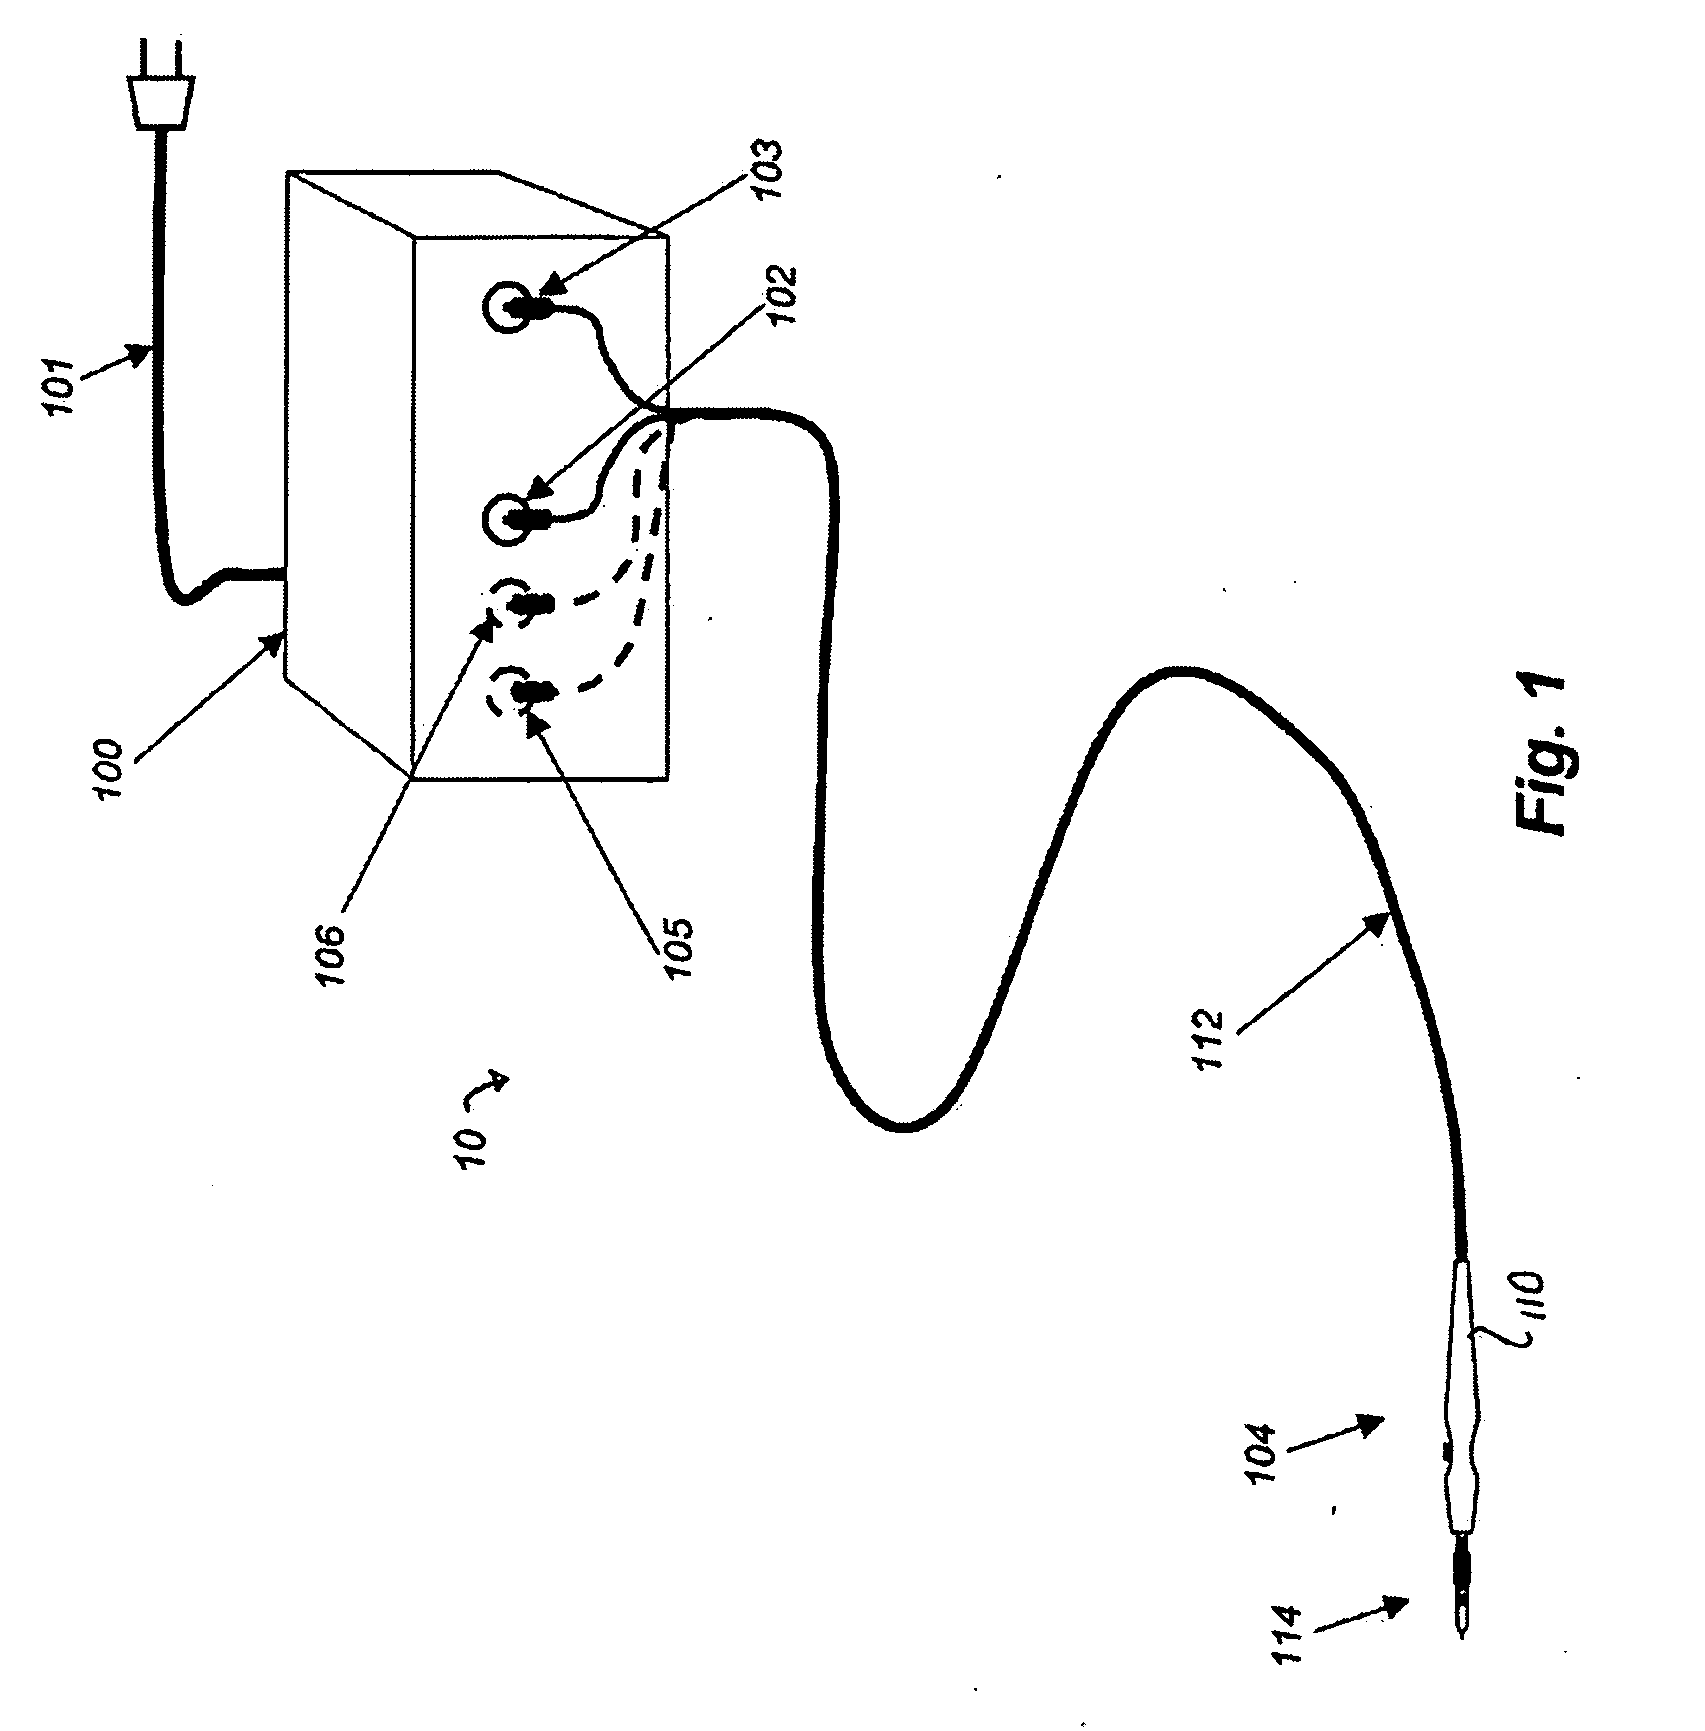 Electrosurgical tool with moveable electrode that can be operated in a cutting mode or a coagulation mode